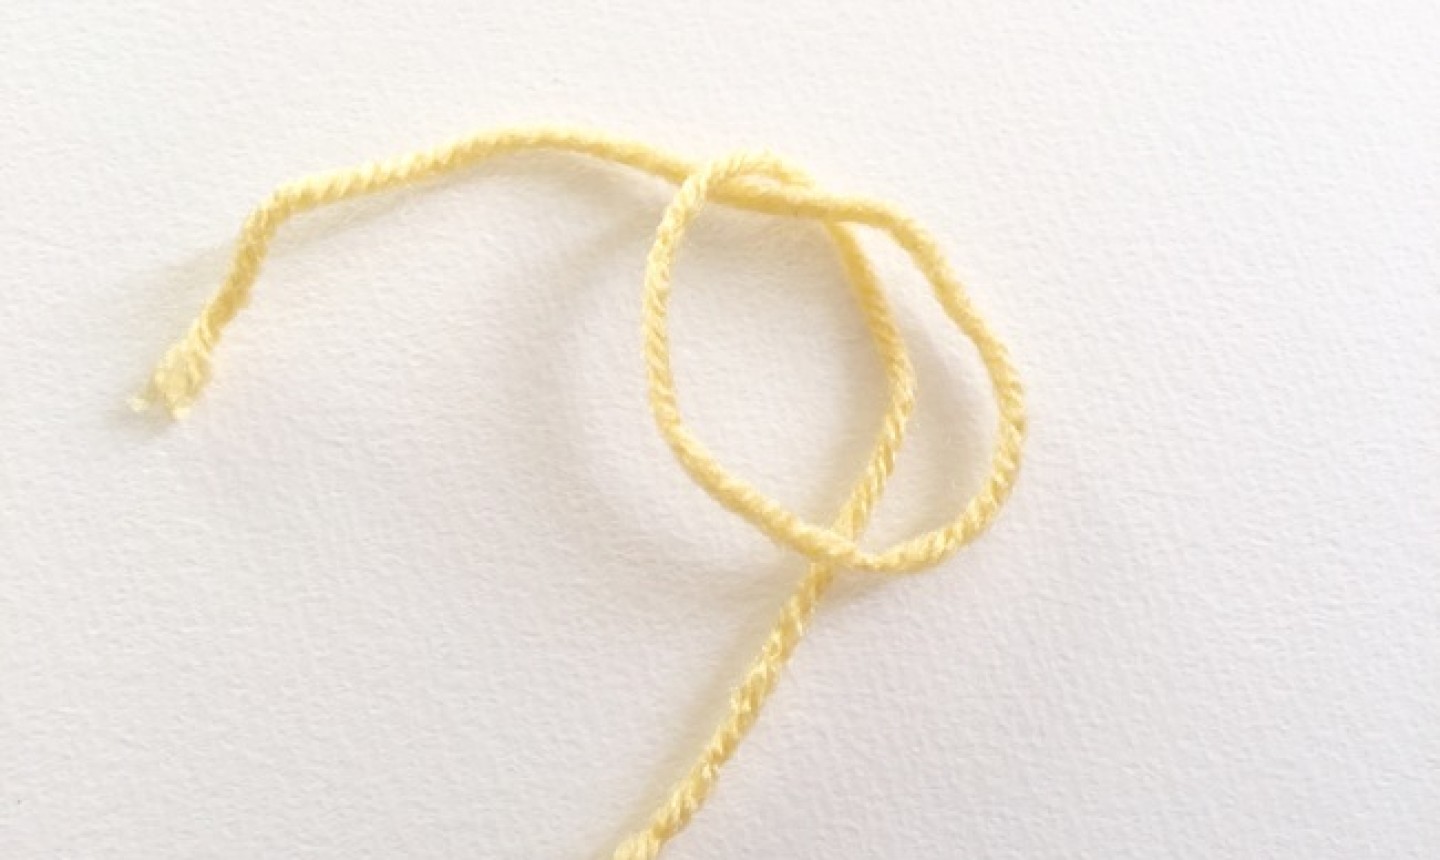 Piece of yellow yarn knotted